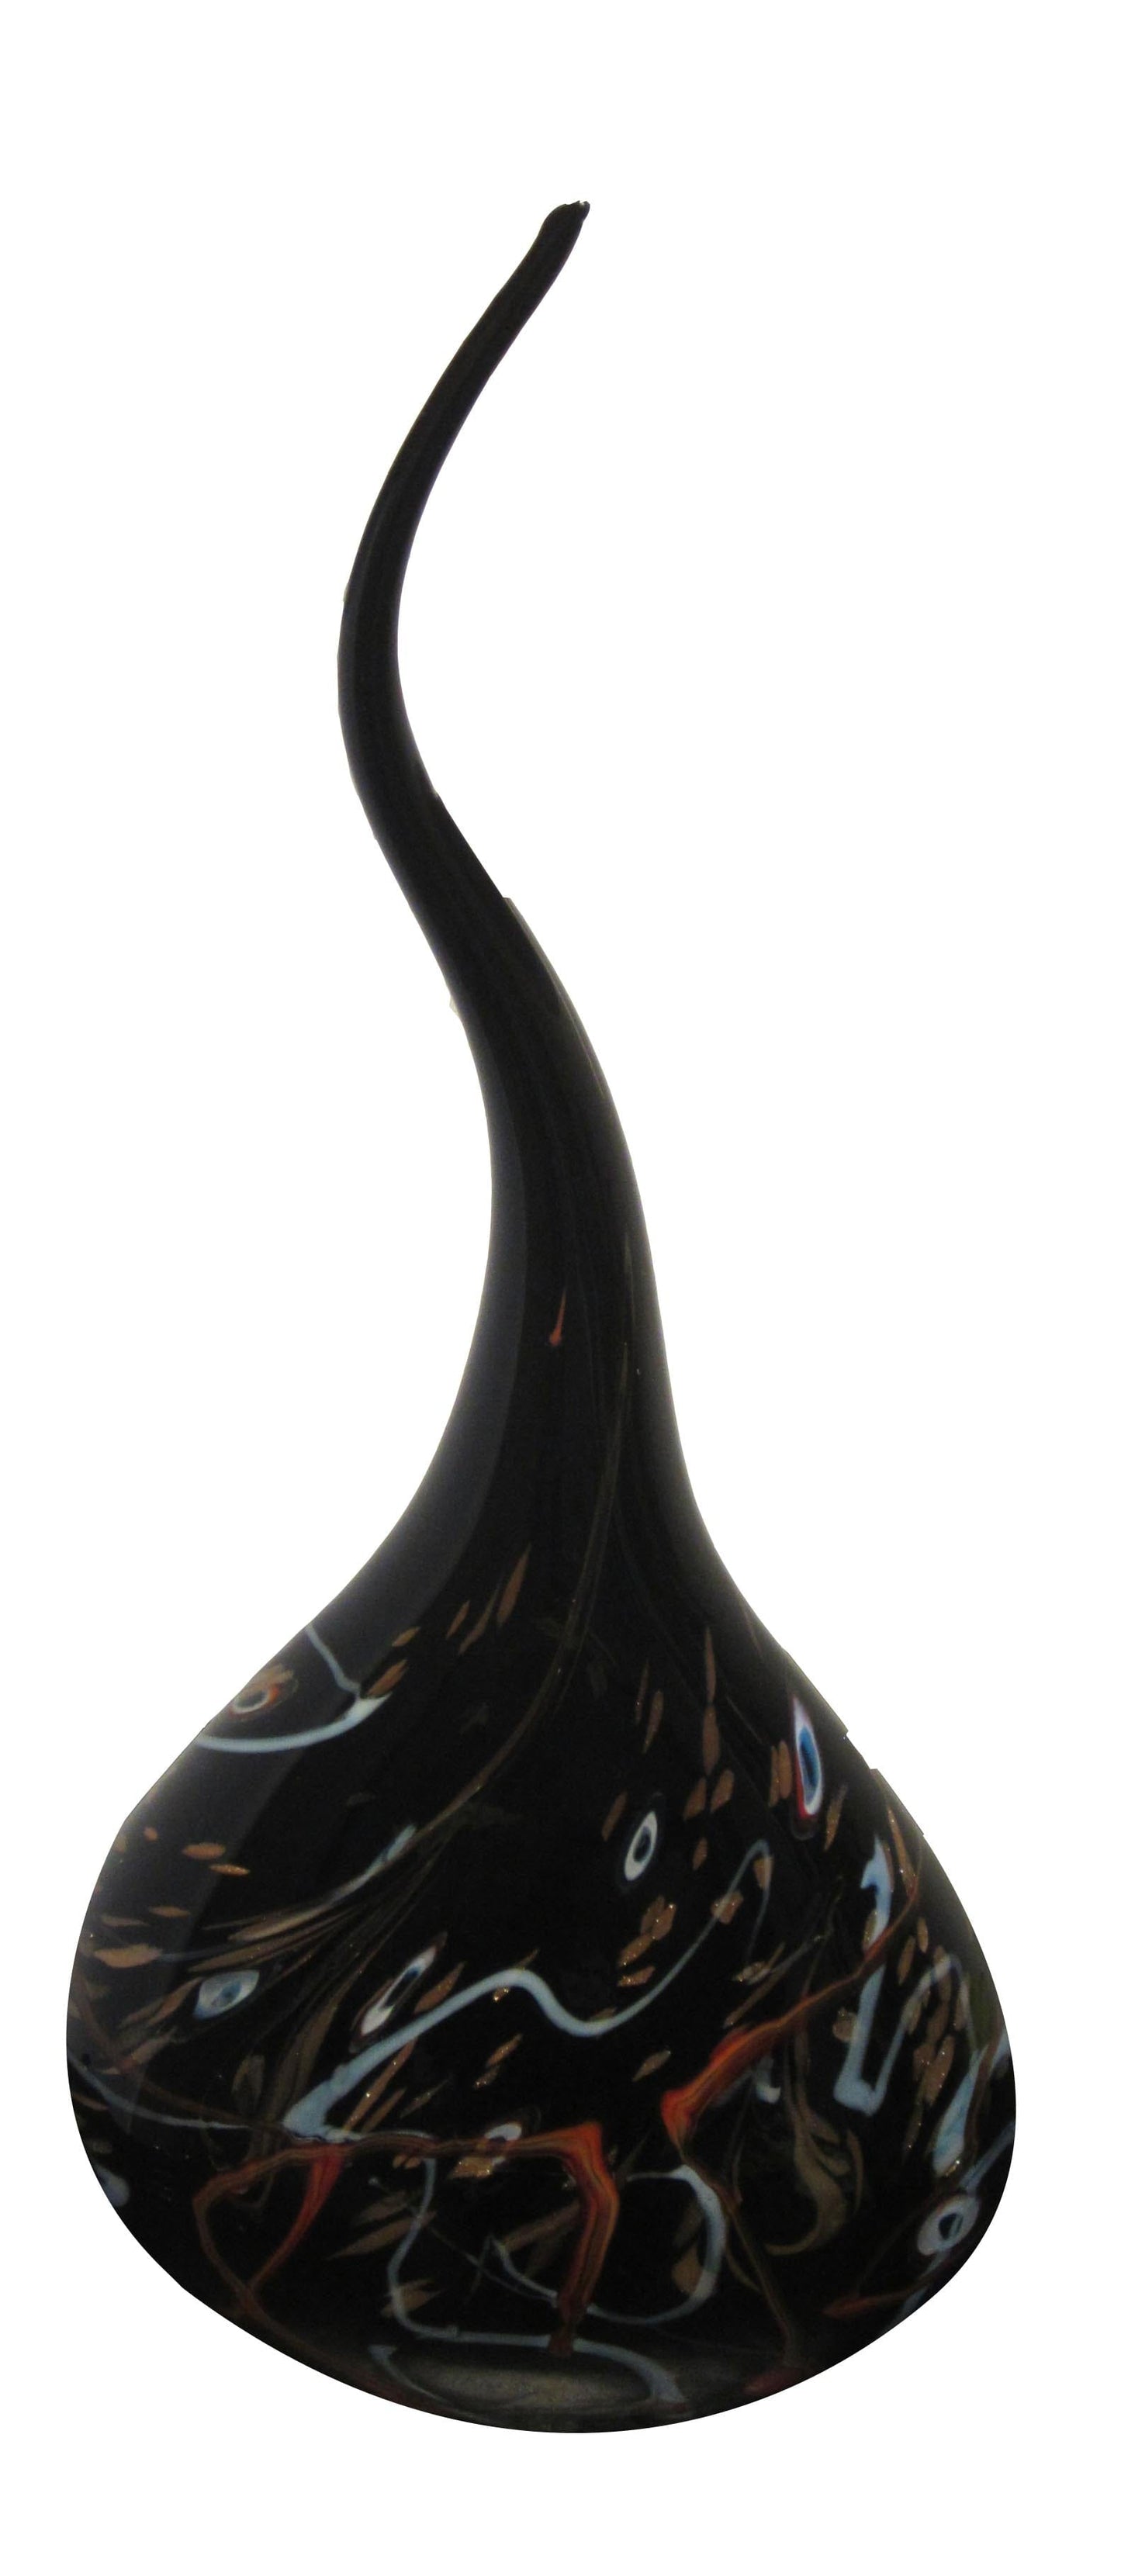 Rare Earth sculpture Pulled Vase Art Works Gallery